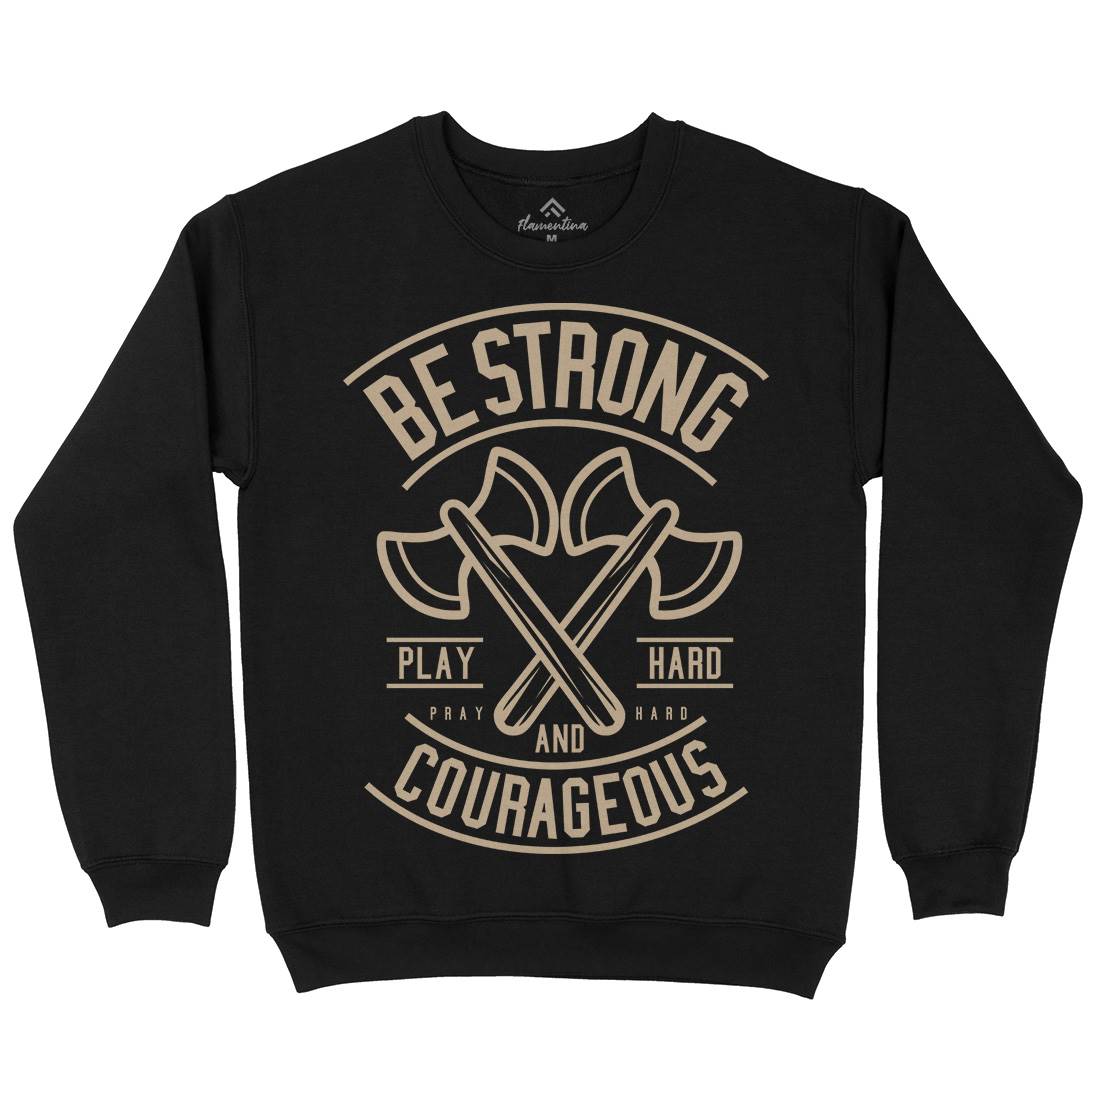 Be Strong Mens Crew Neck Sweatshirt Quotes A205